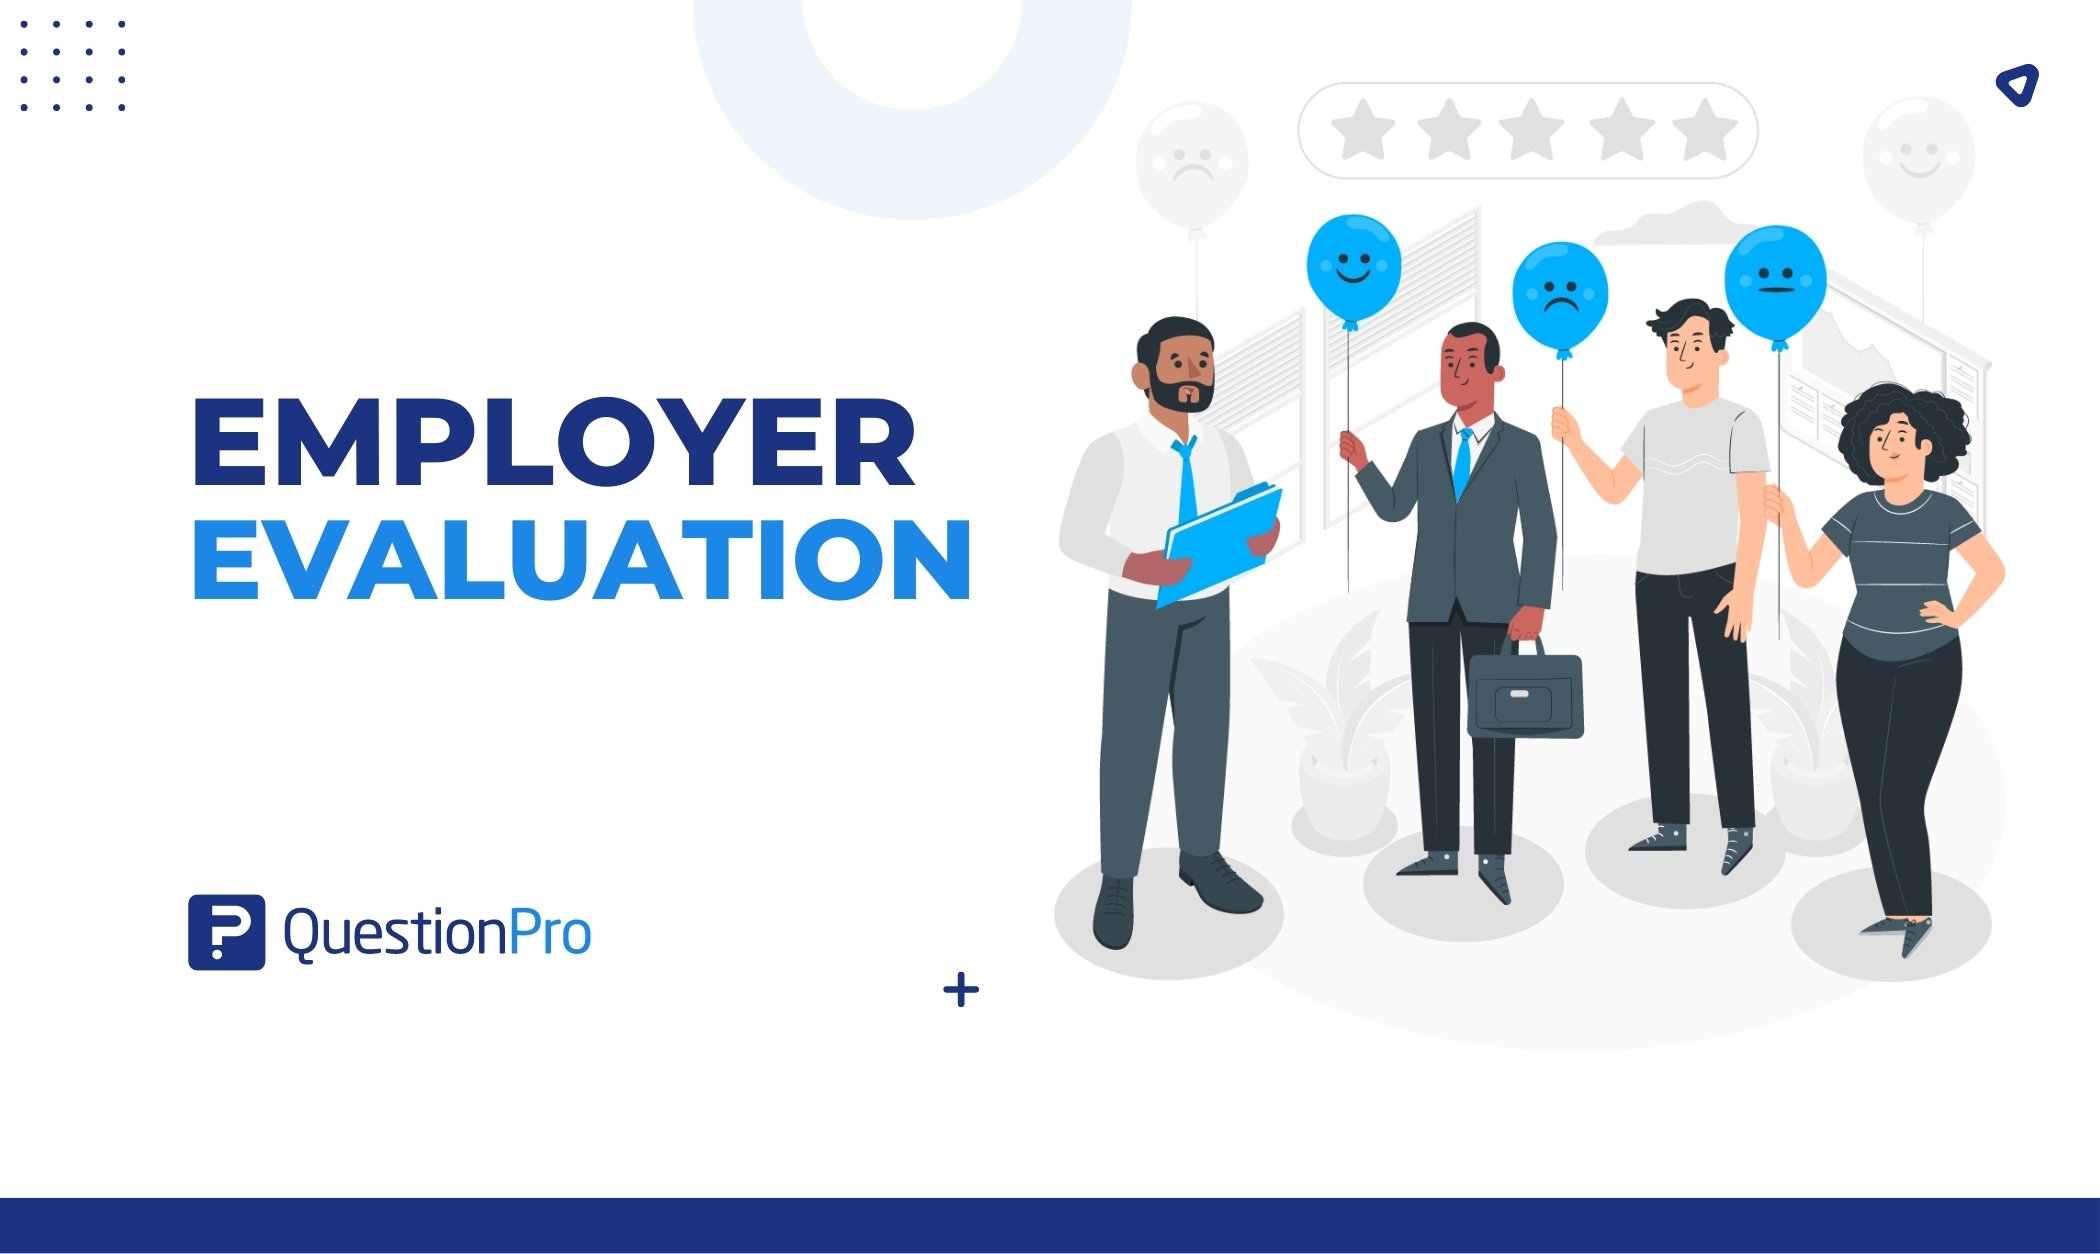 Employer evaluation is the process of evaluating an employer's success and work environment. Learn how to do a successful evaluation.